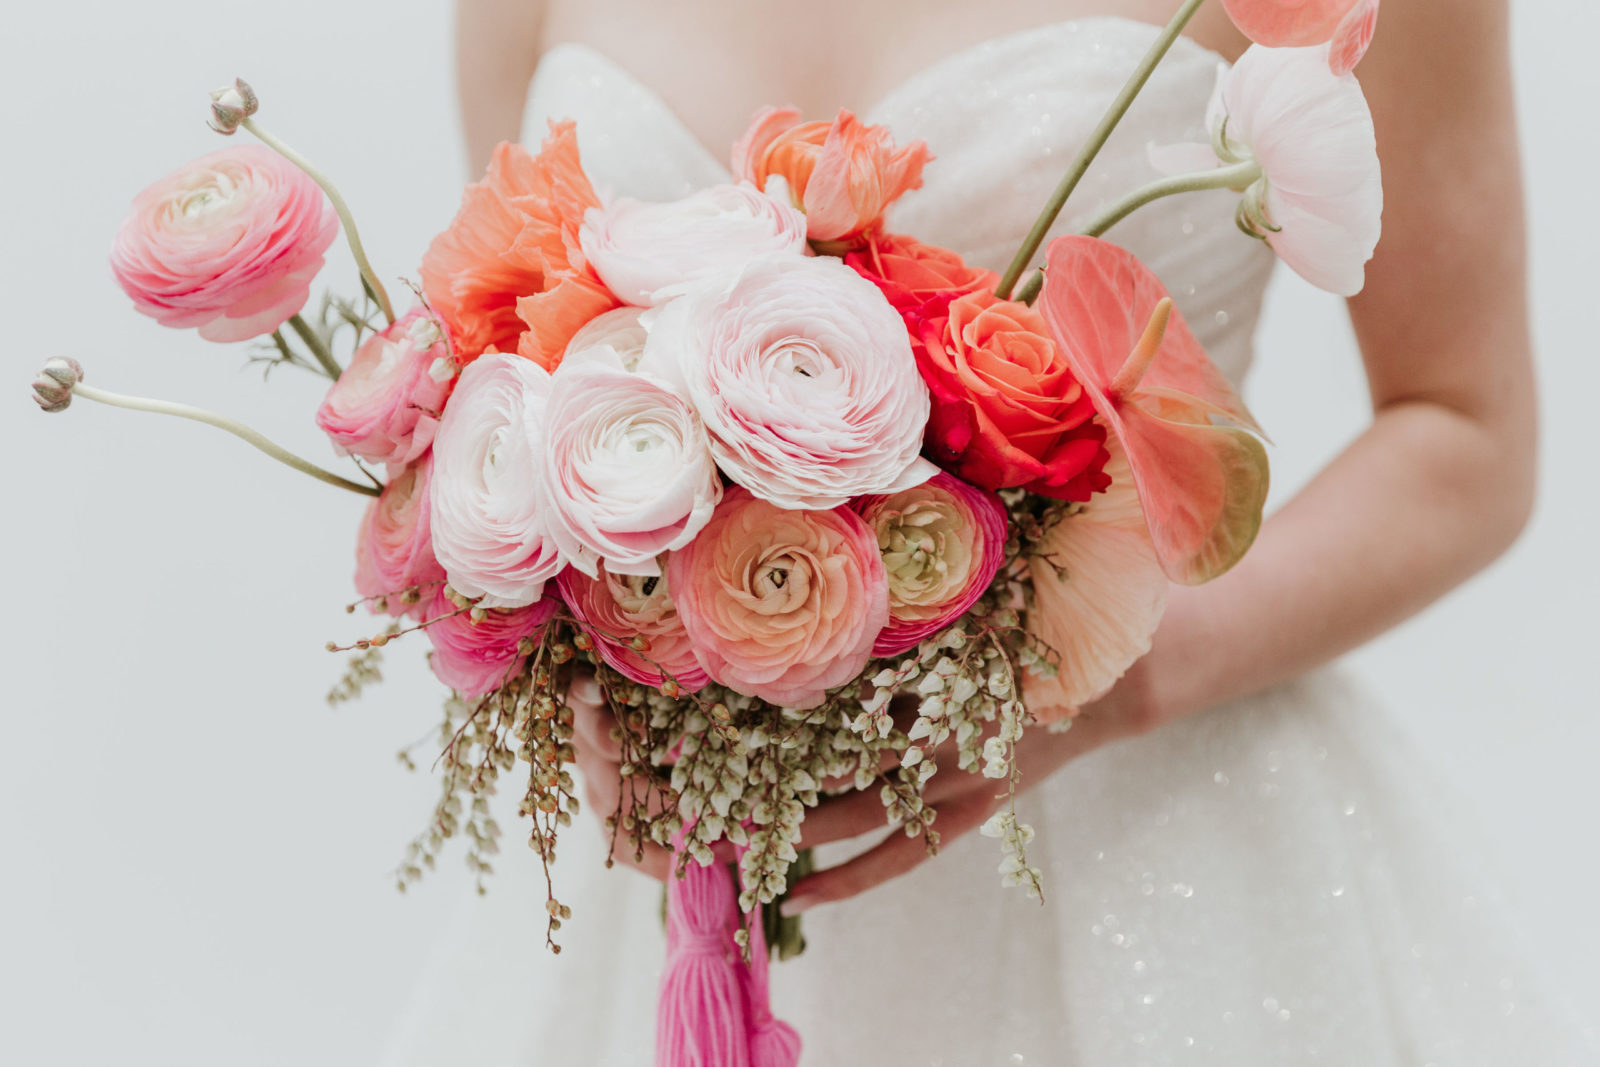 Modern and Glamorous Wedding Celebration Inspiration With A Pop of Pink | bold orange and pink bridal bouquet for the modern bride